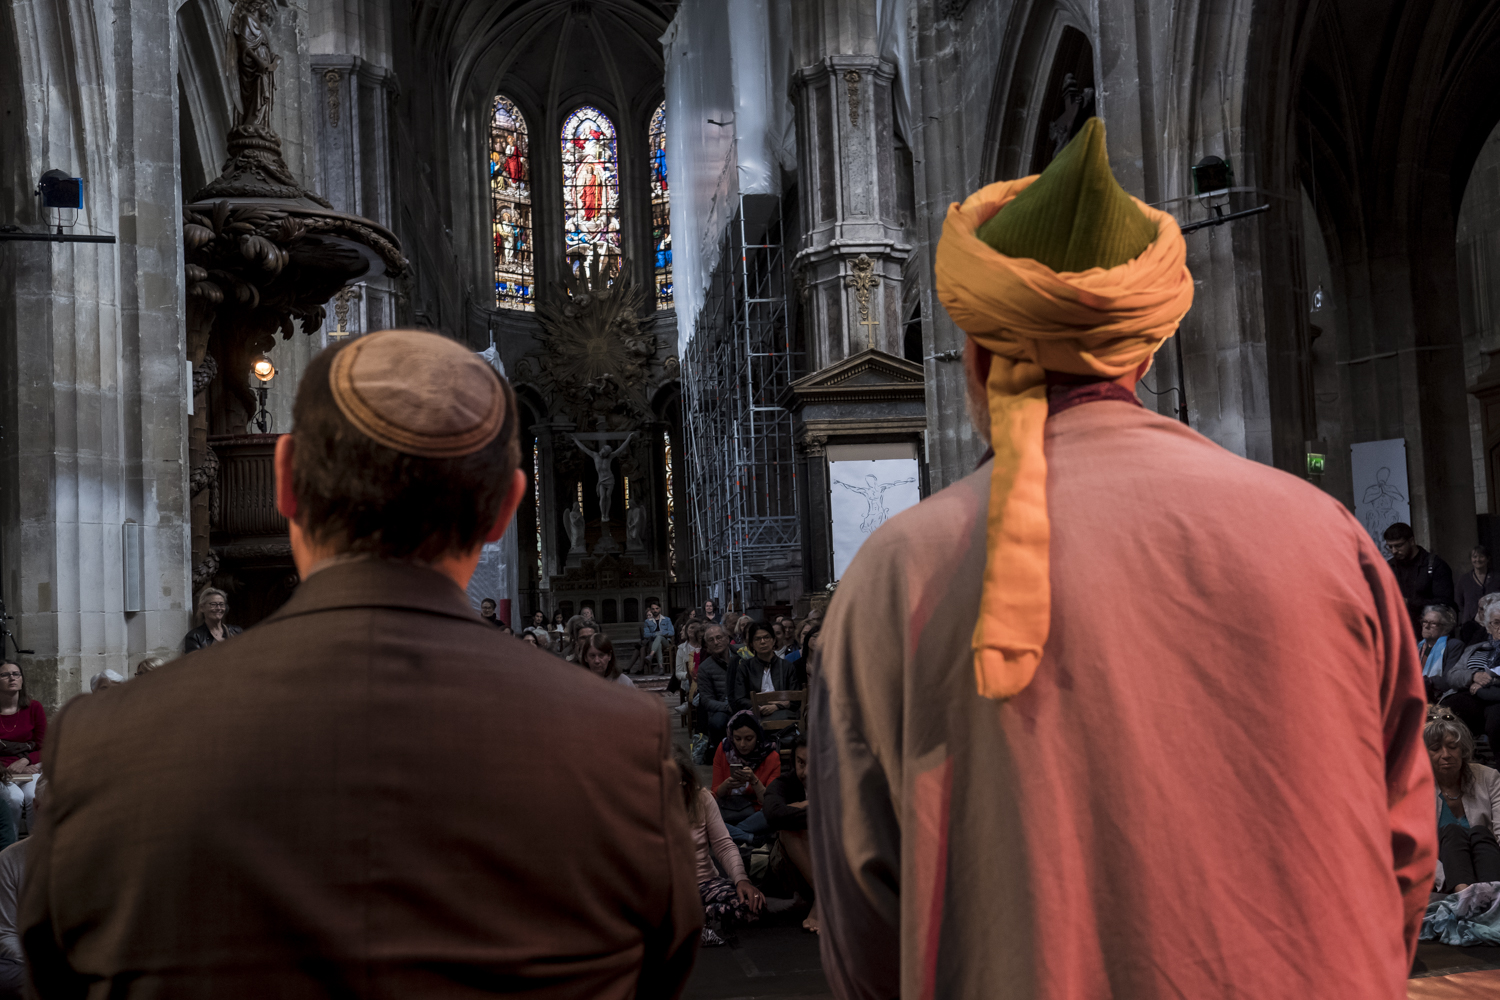 Rabbi Tom Cohen, founder of Kehilat Gesher, the French-American synagogue of Paris (left) and Abd El Hafid Benchouk, representative of the Naqshbandi Sufi Way in France during the "Nuit Sacree 2019" (photo: Jan Schmidt-Whitley / Le Pictorium)